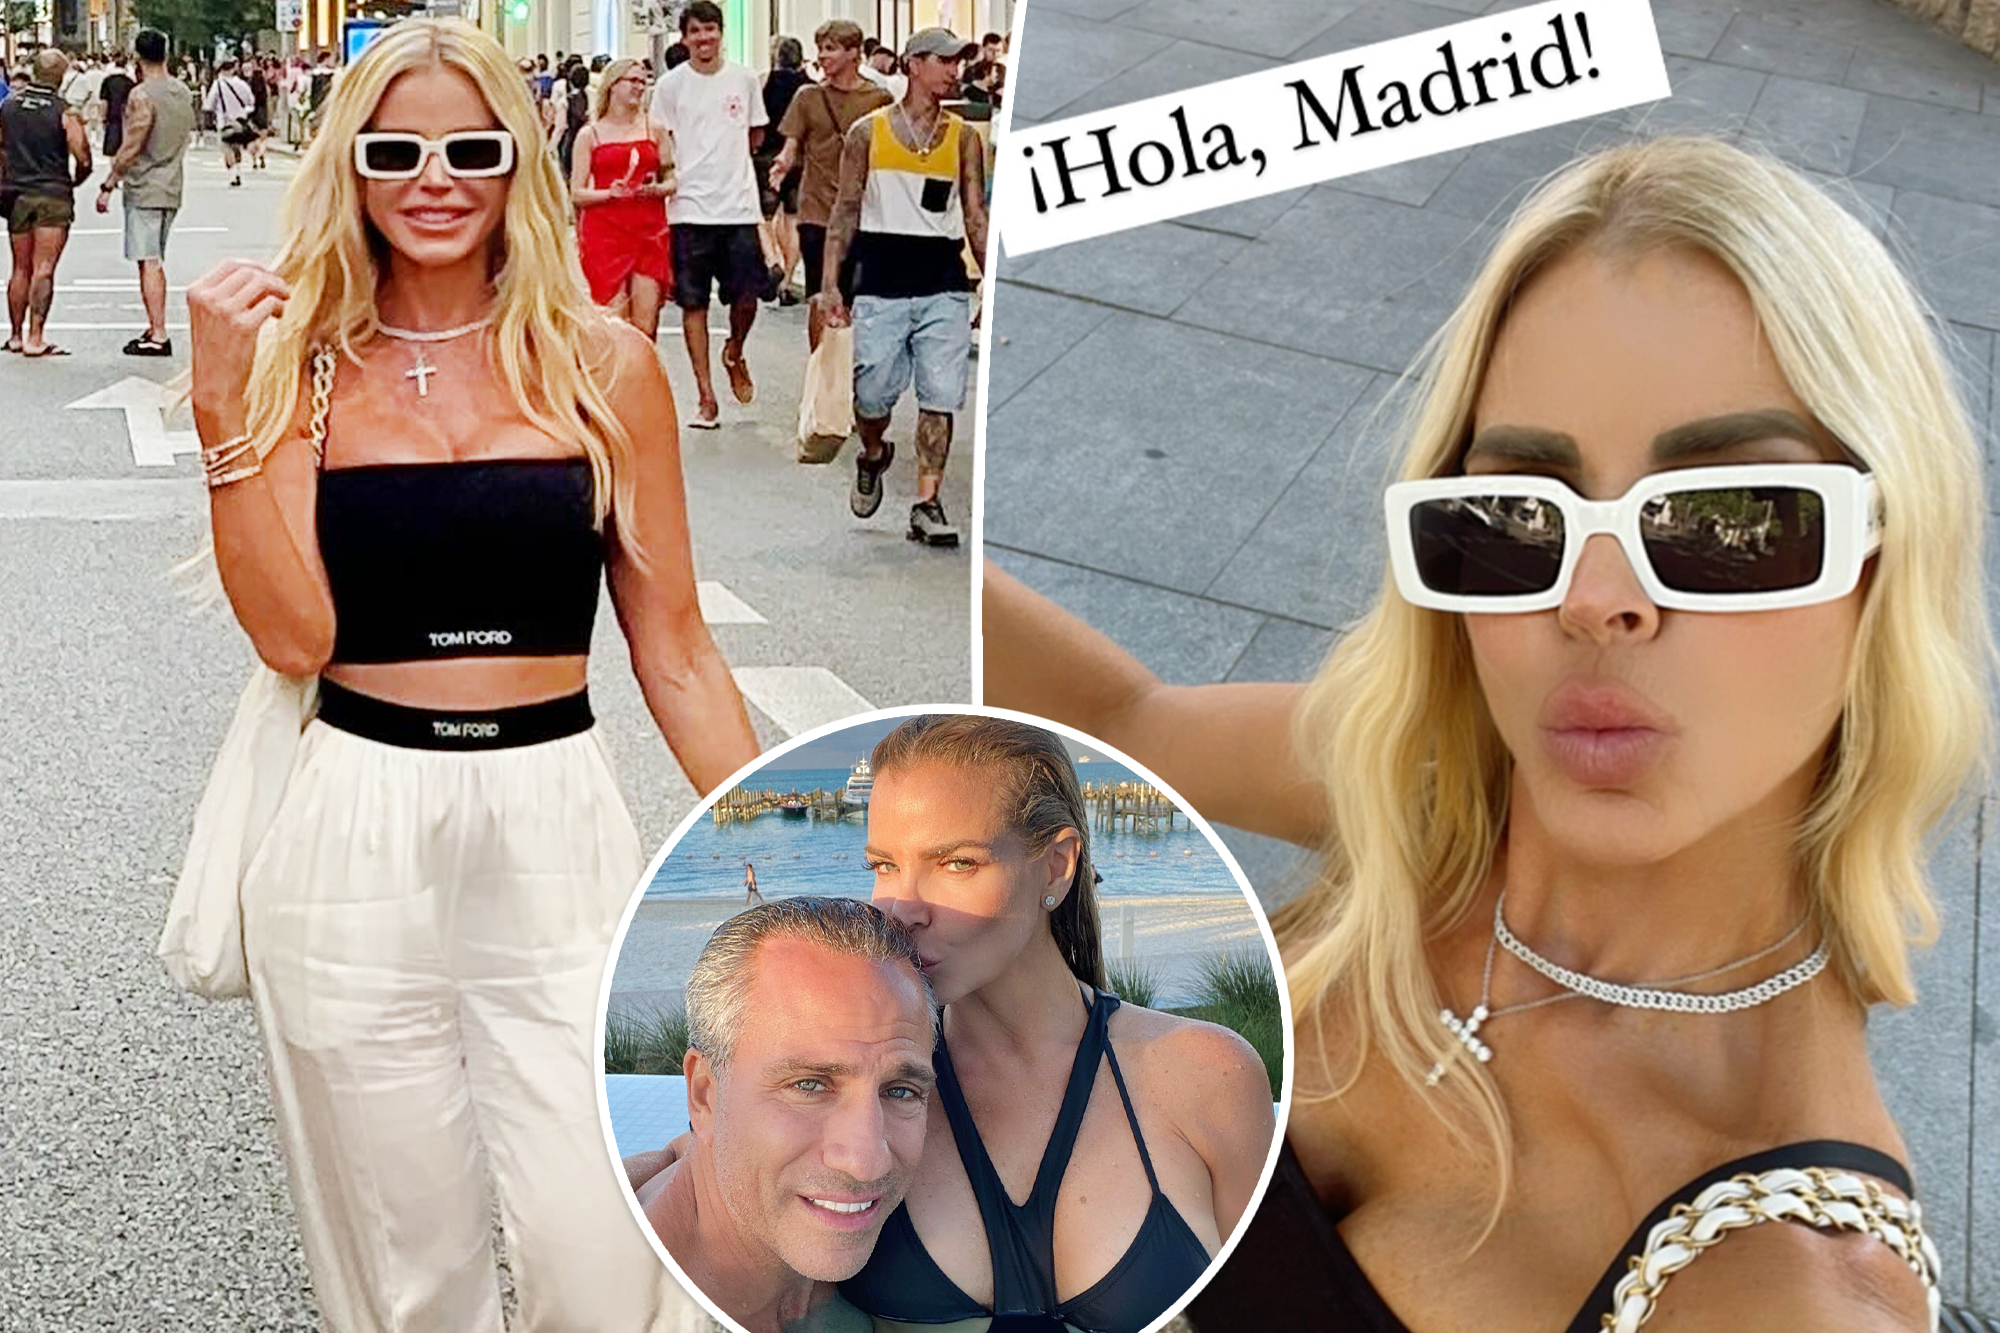 RHOM Star Alexia Nepola Drops Major Hint About Reunion with Estranged Hubby in Madrid!